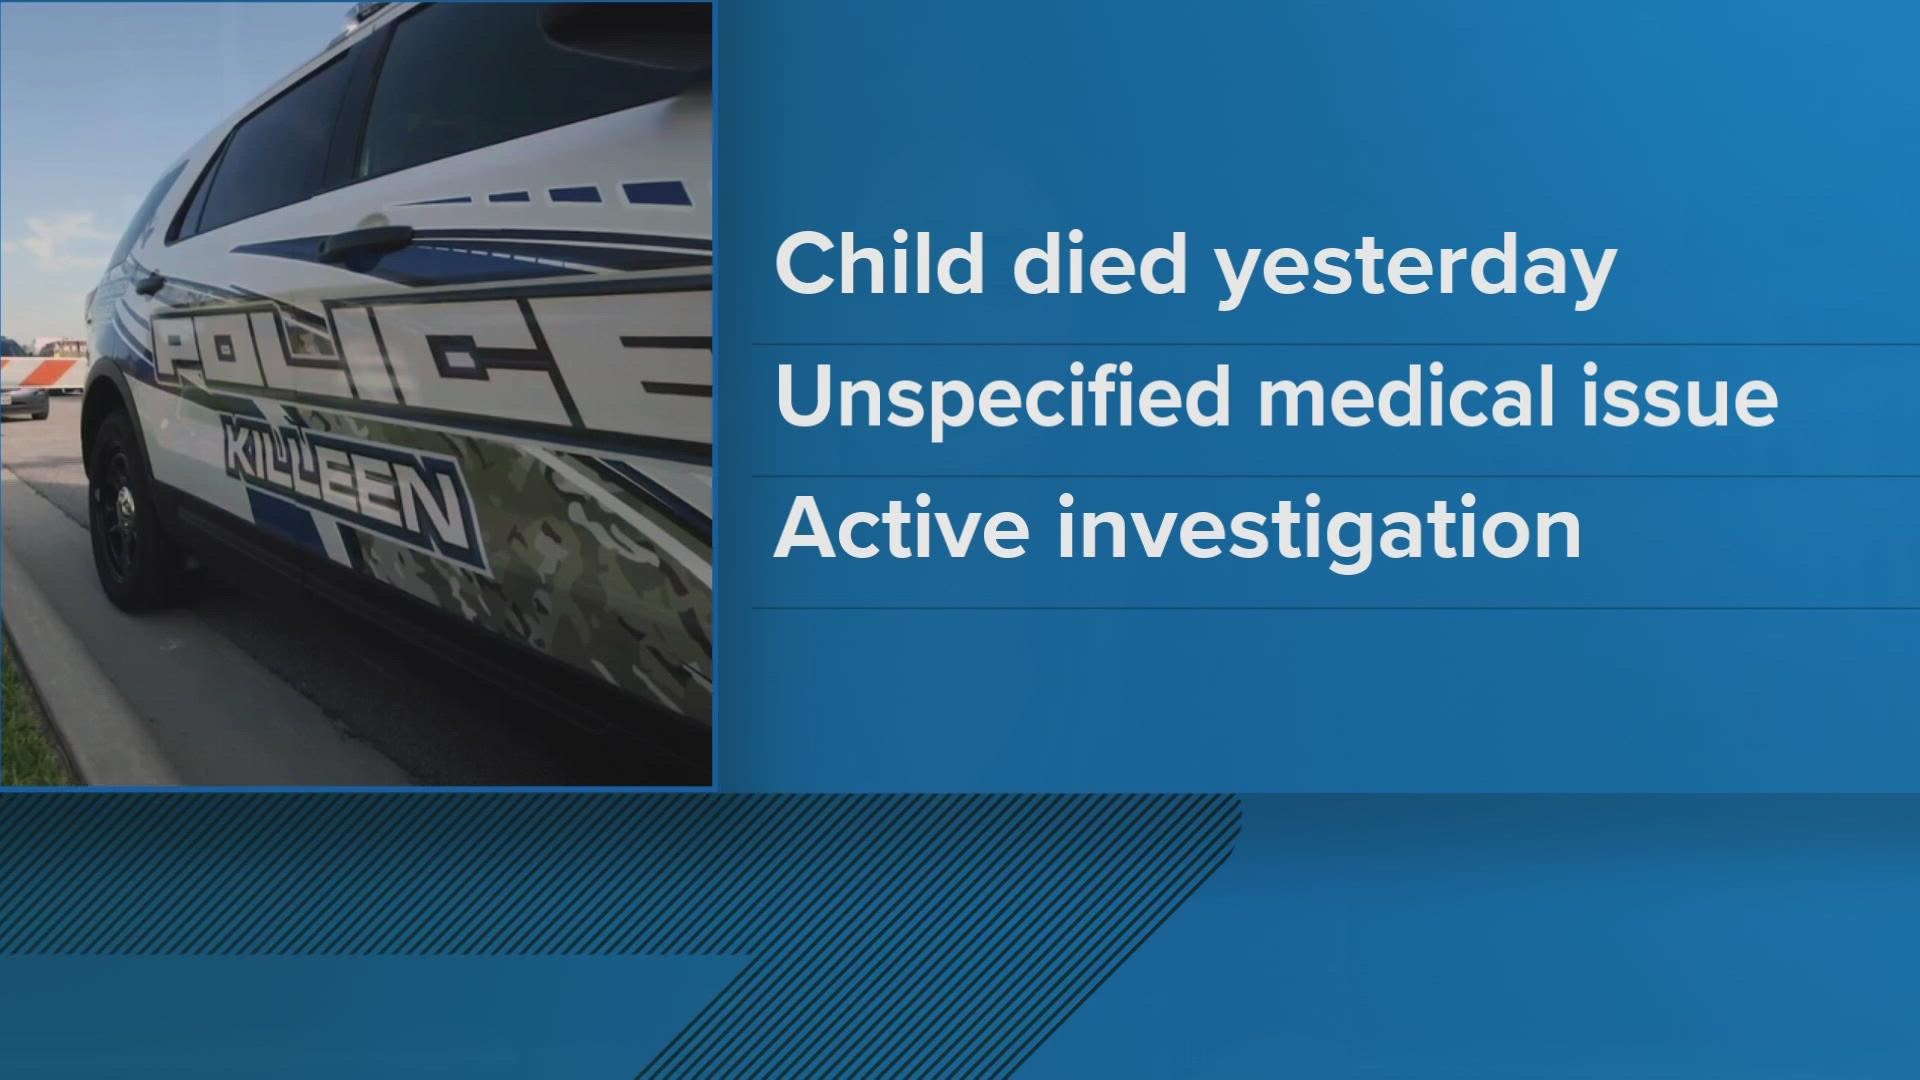 Bell County Justice of the Peace officially declared the child dead at 2:15 p.m., KPD stated.